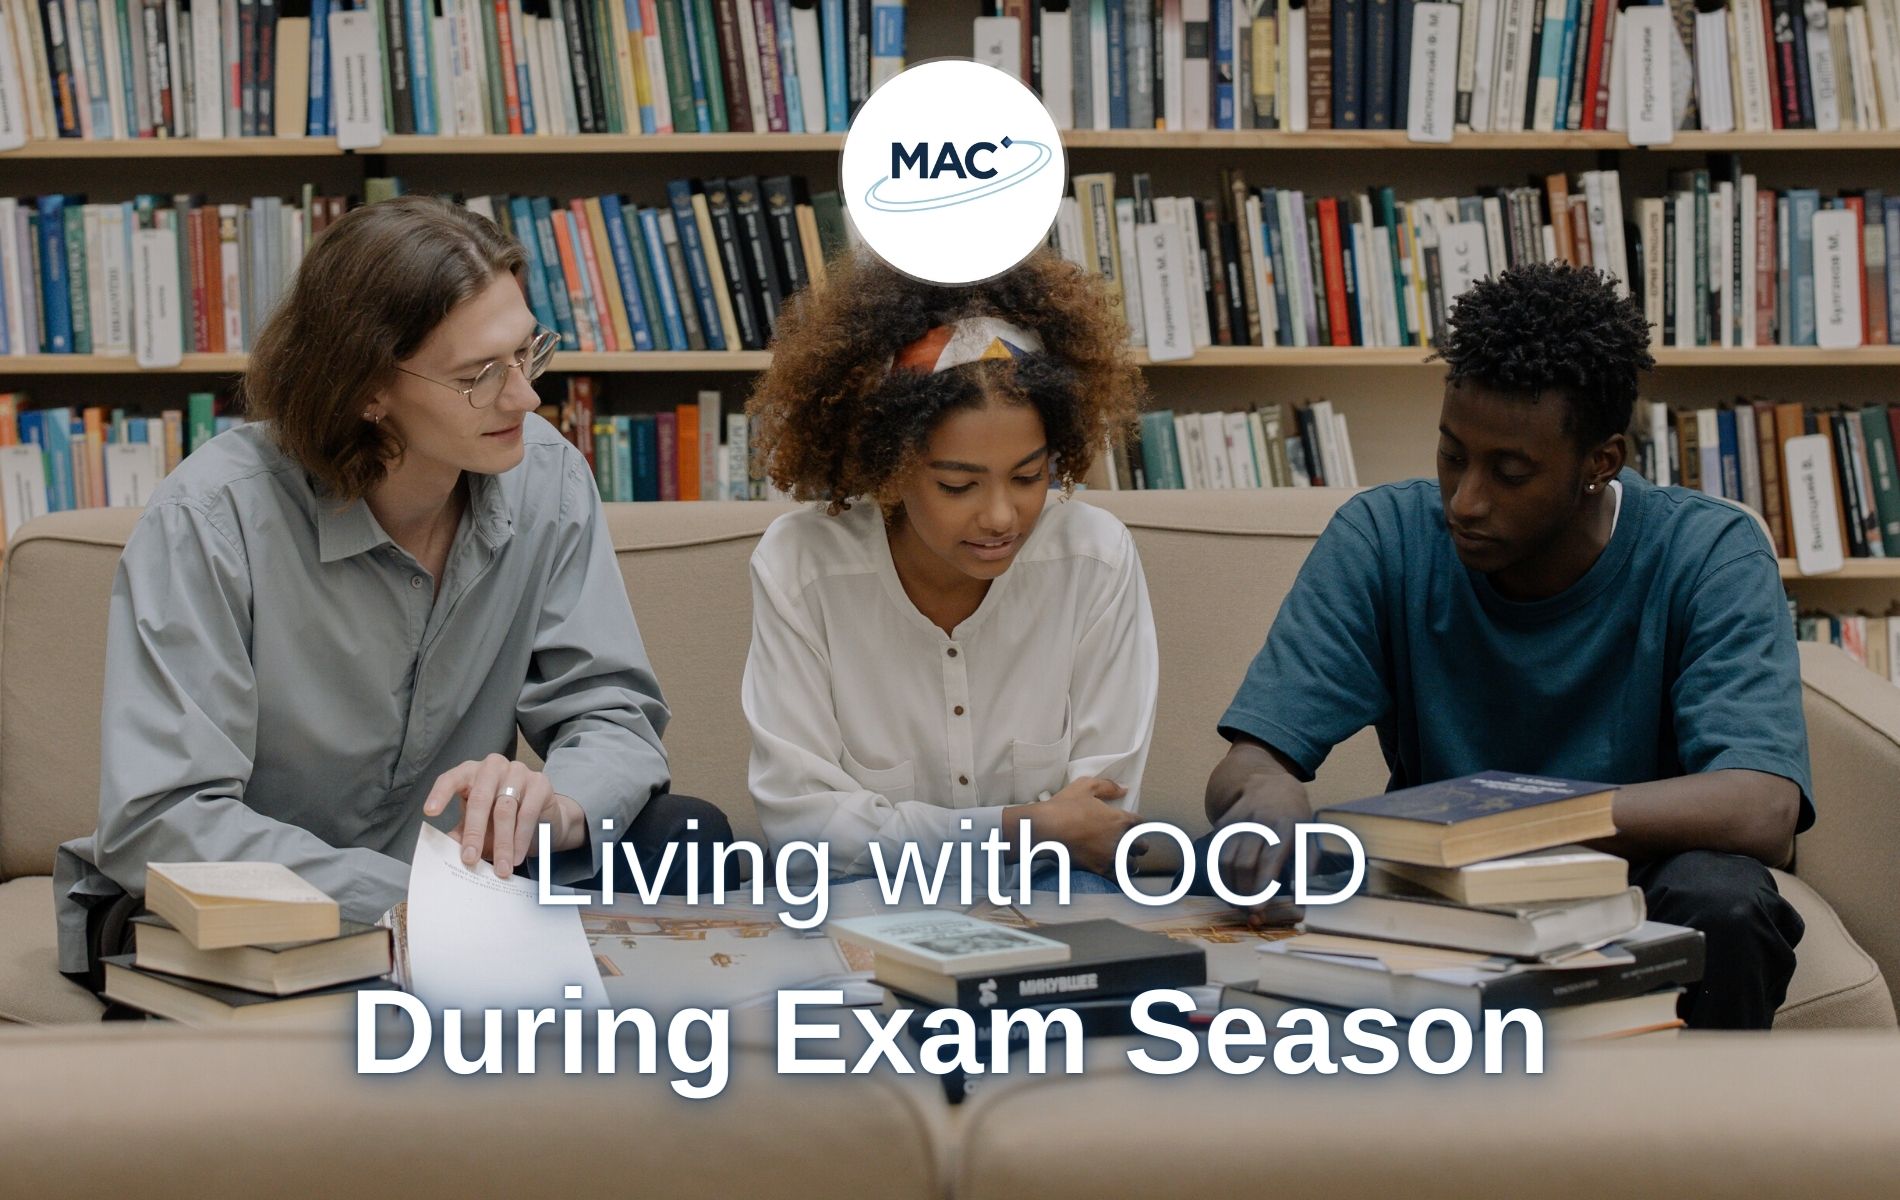 Living with OCD during exam season